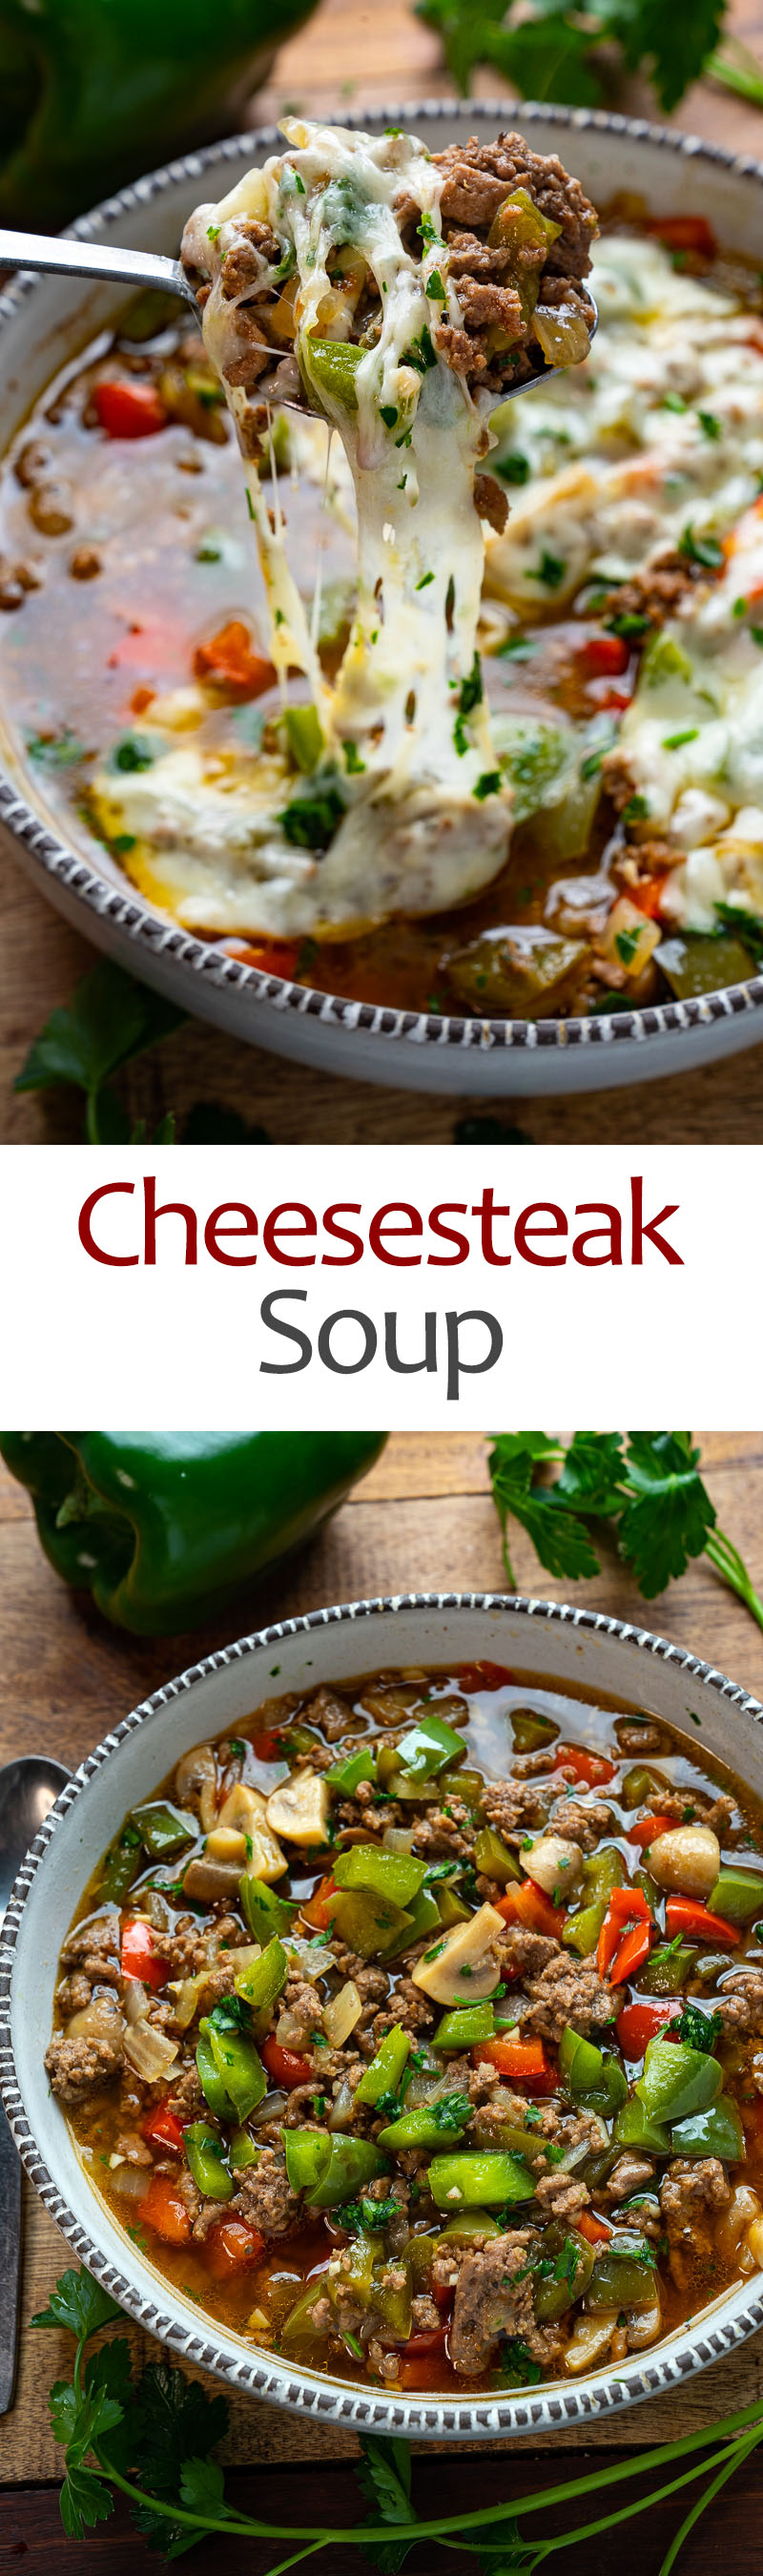 Philly Cheesesteak Soup